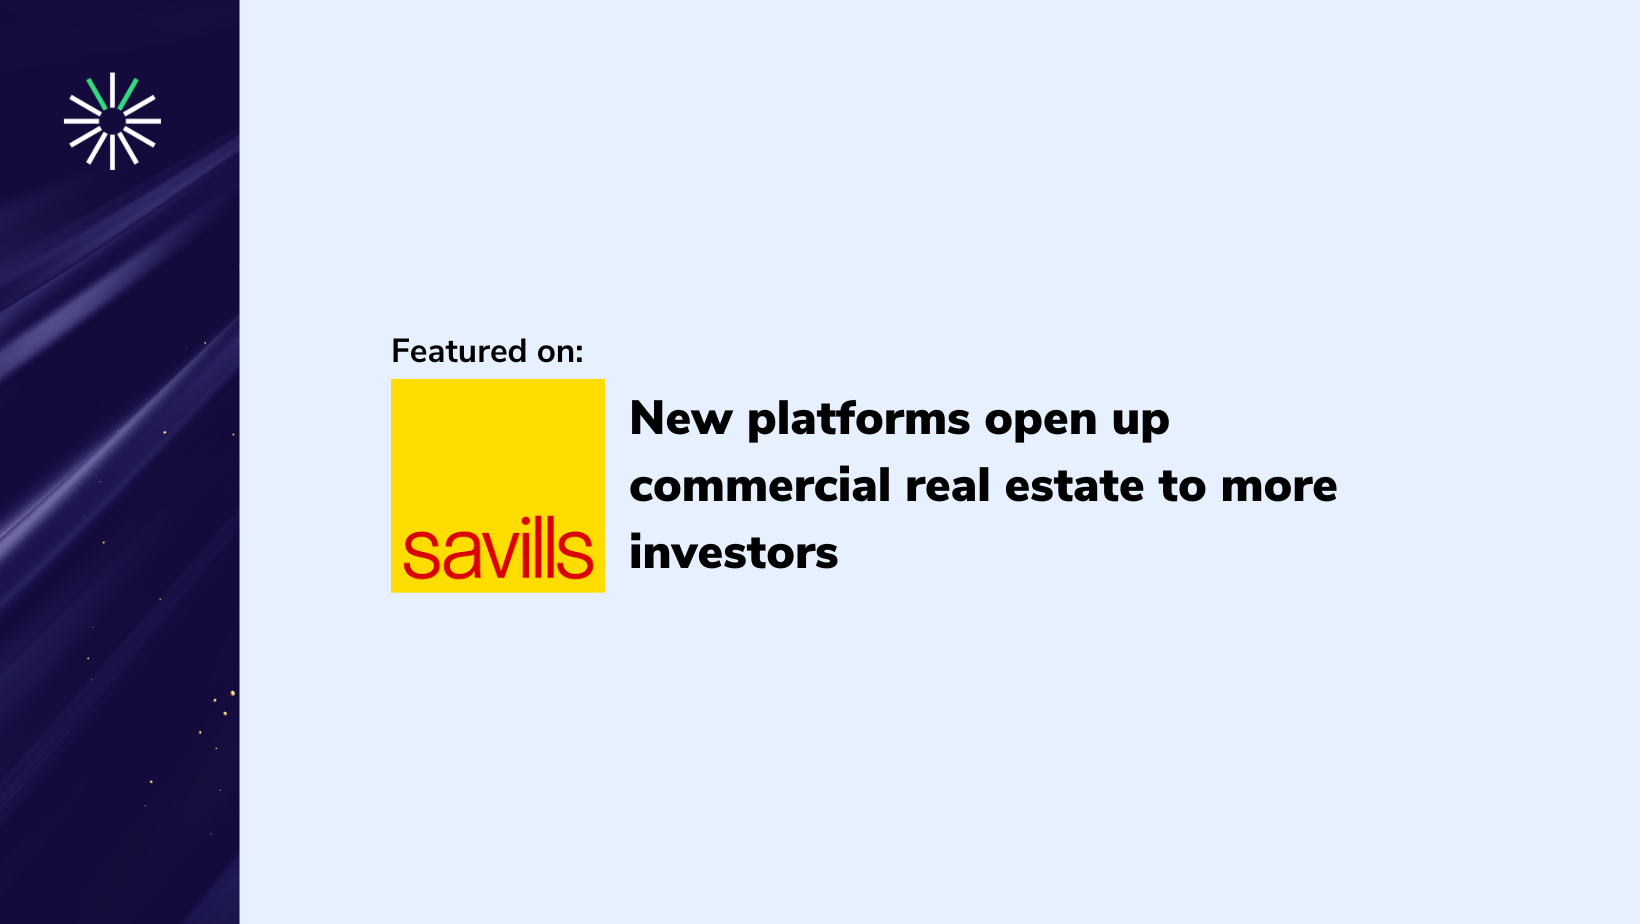 Savills - New platforms open up commercial real estate to more investors